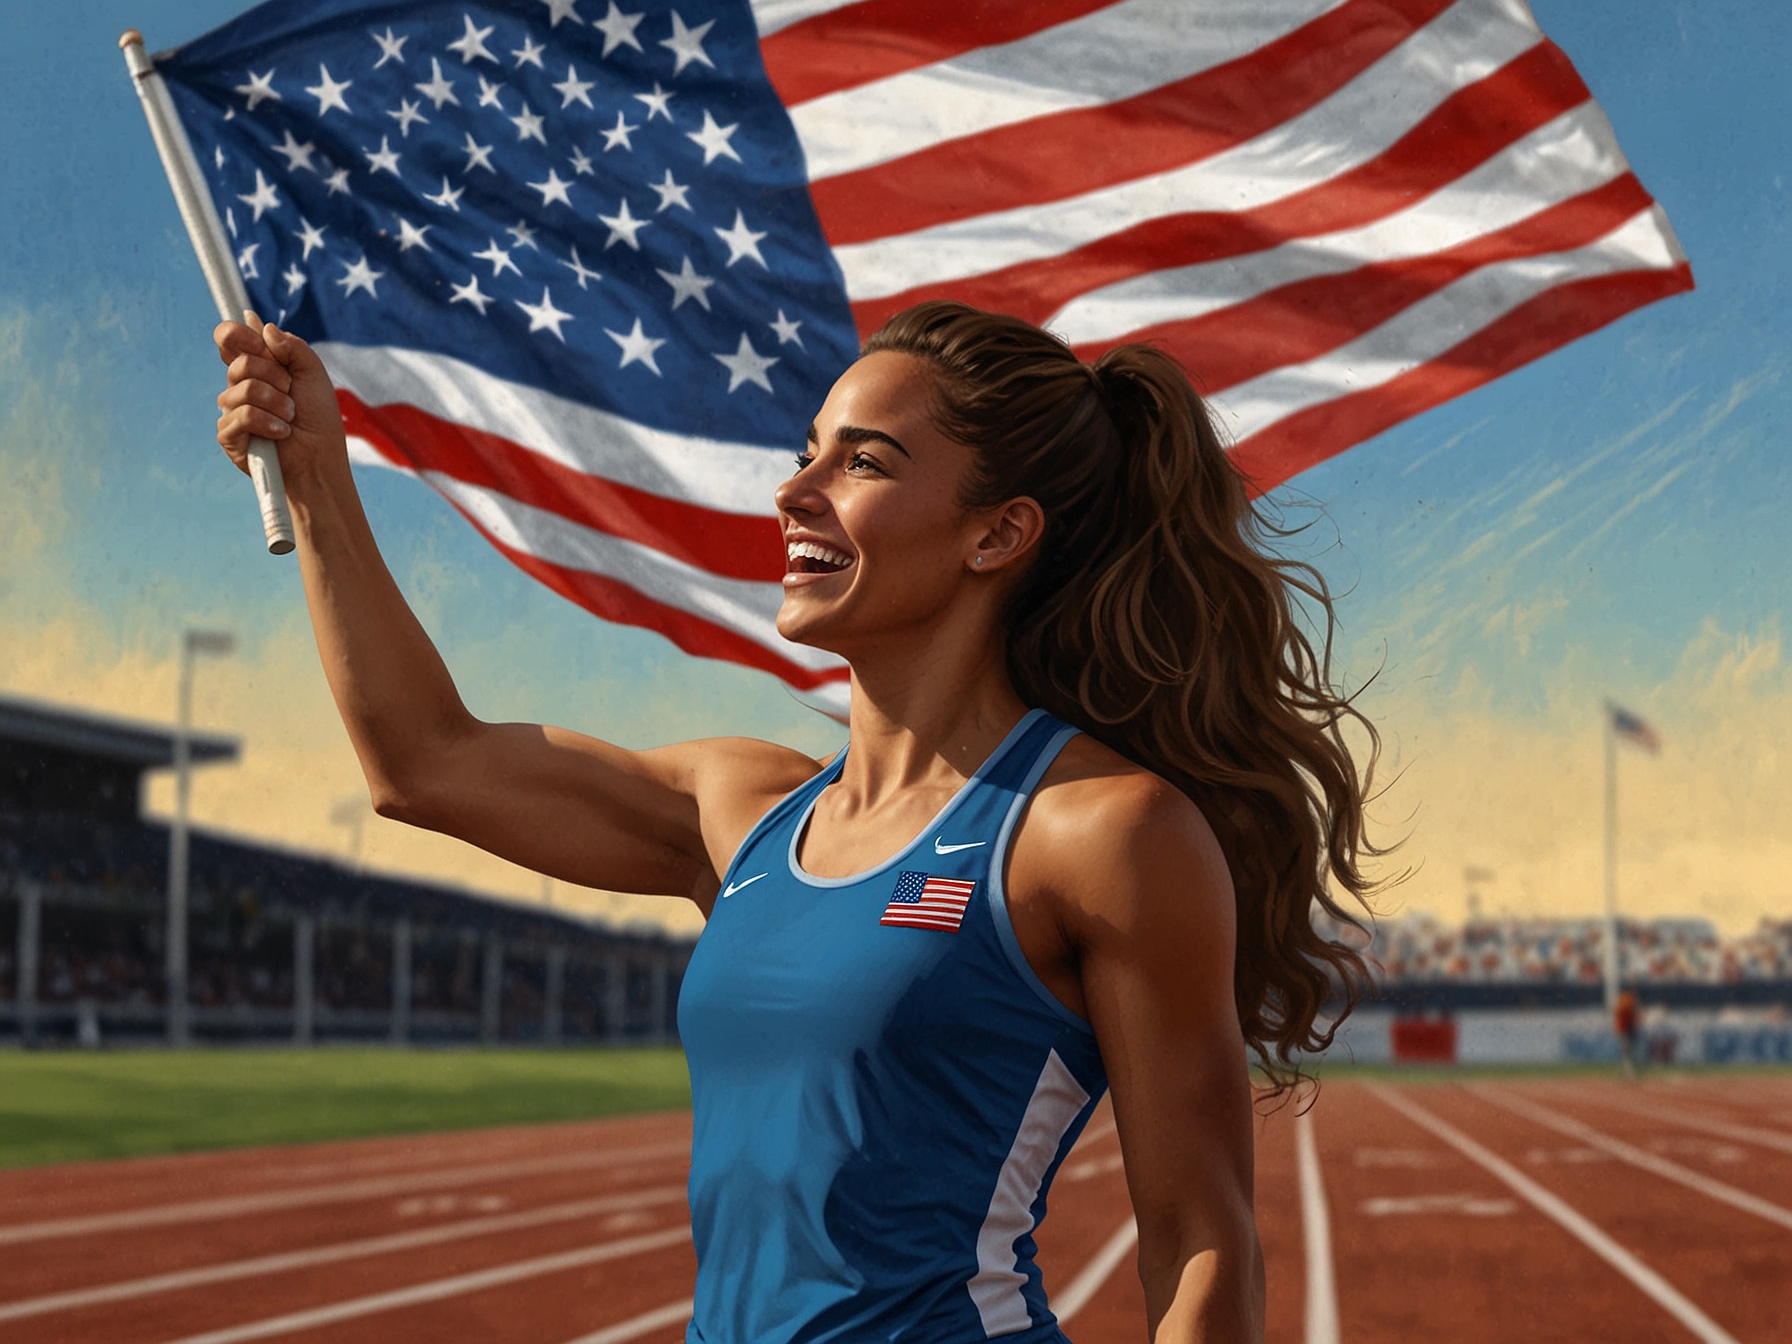 A jubilant Sydney McLaughlin-Levrone celebrating her world record achievement, holding the American flag and sharing the moment with her coach Bobby Kersee on the track.